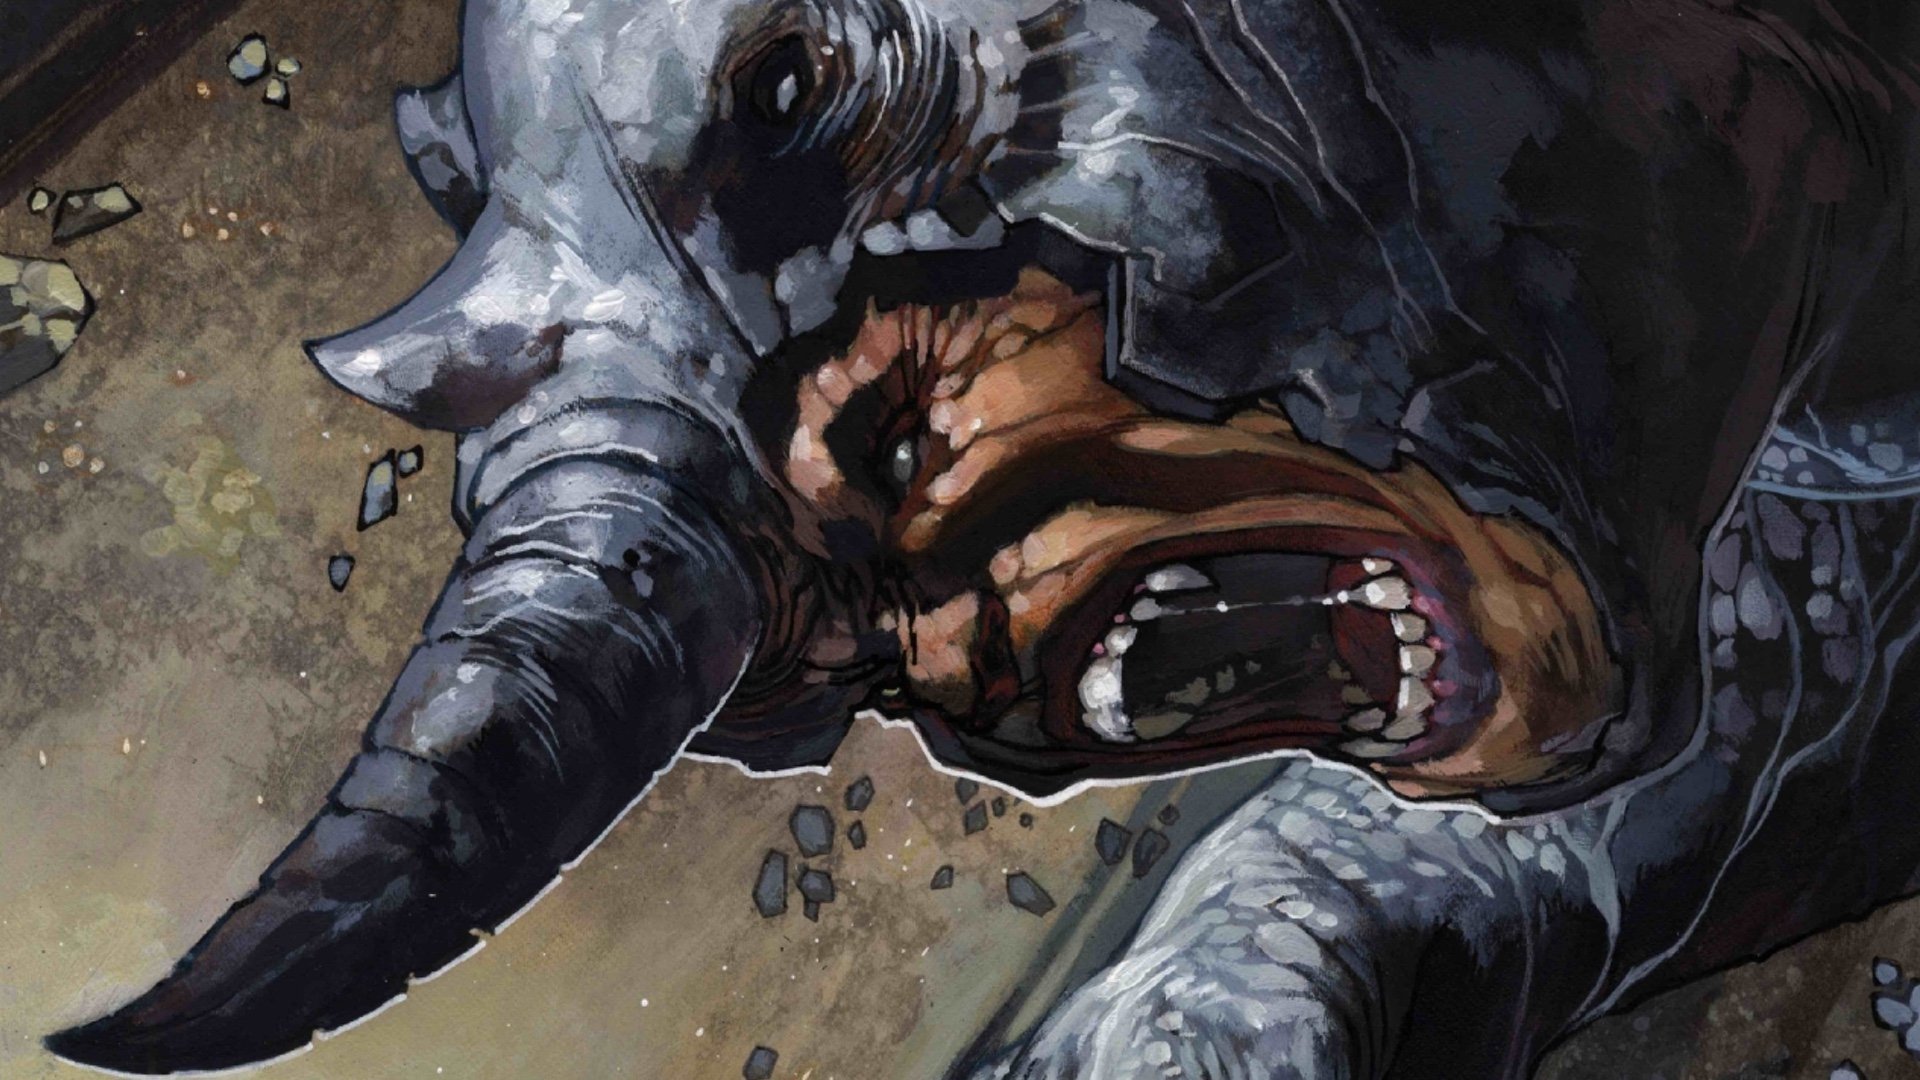 Kraven the Hunter, Release date, cast, trailer and news